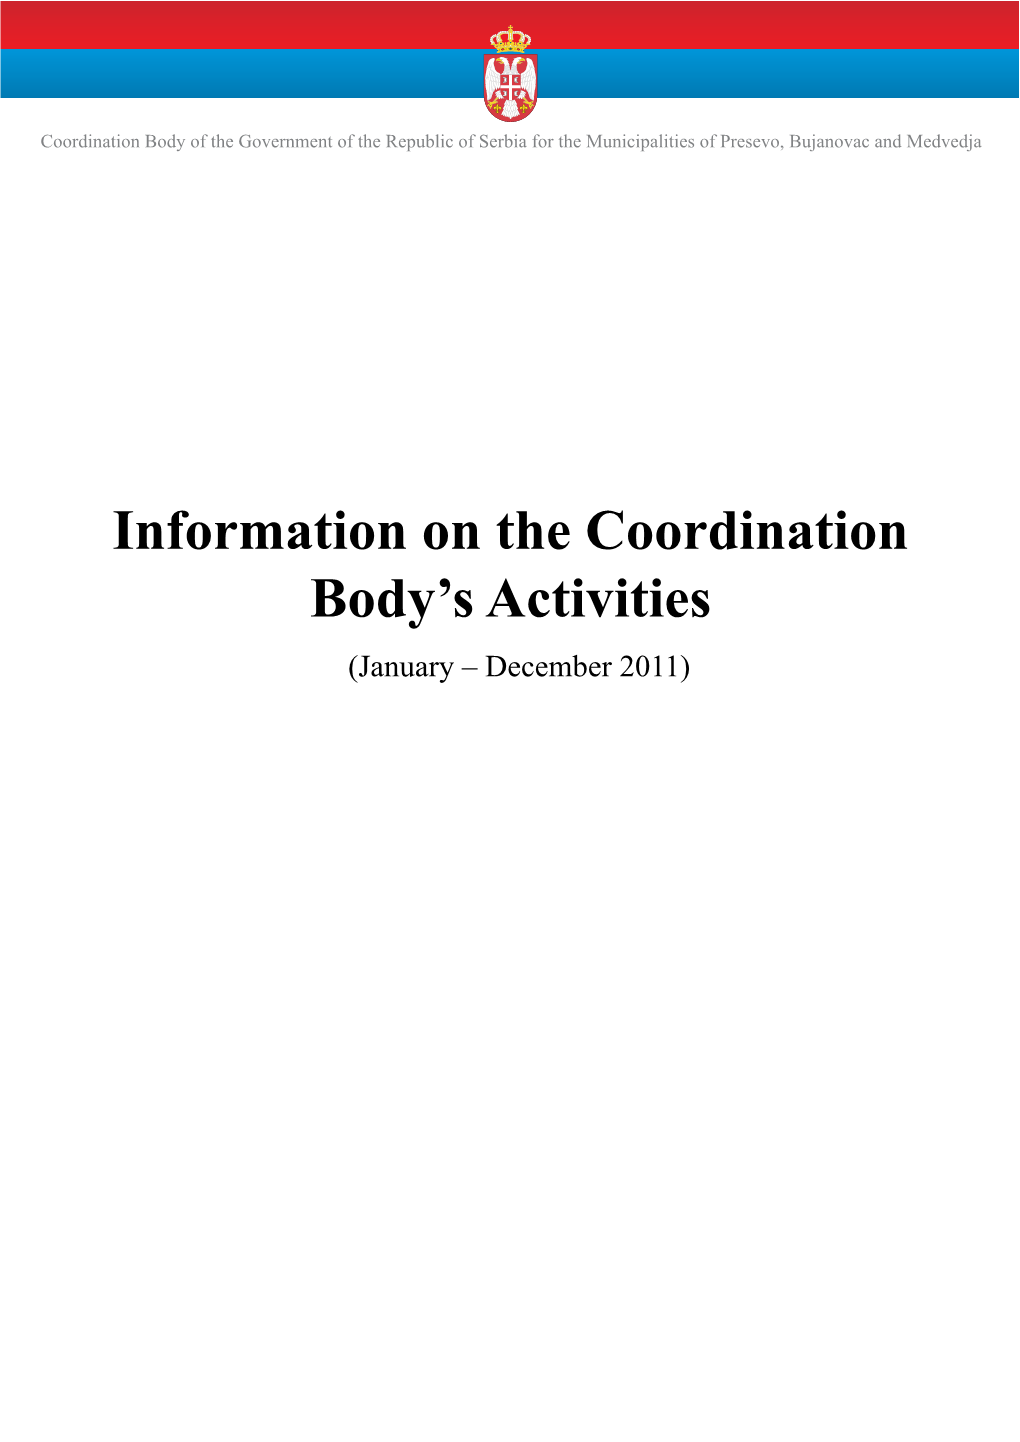 Information on the Coordination Body's Activities